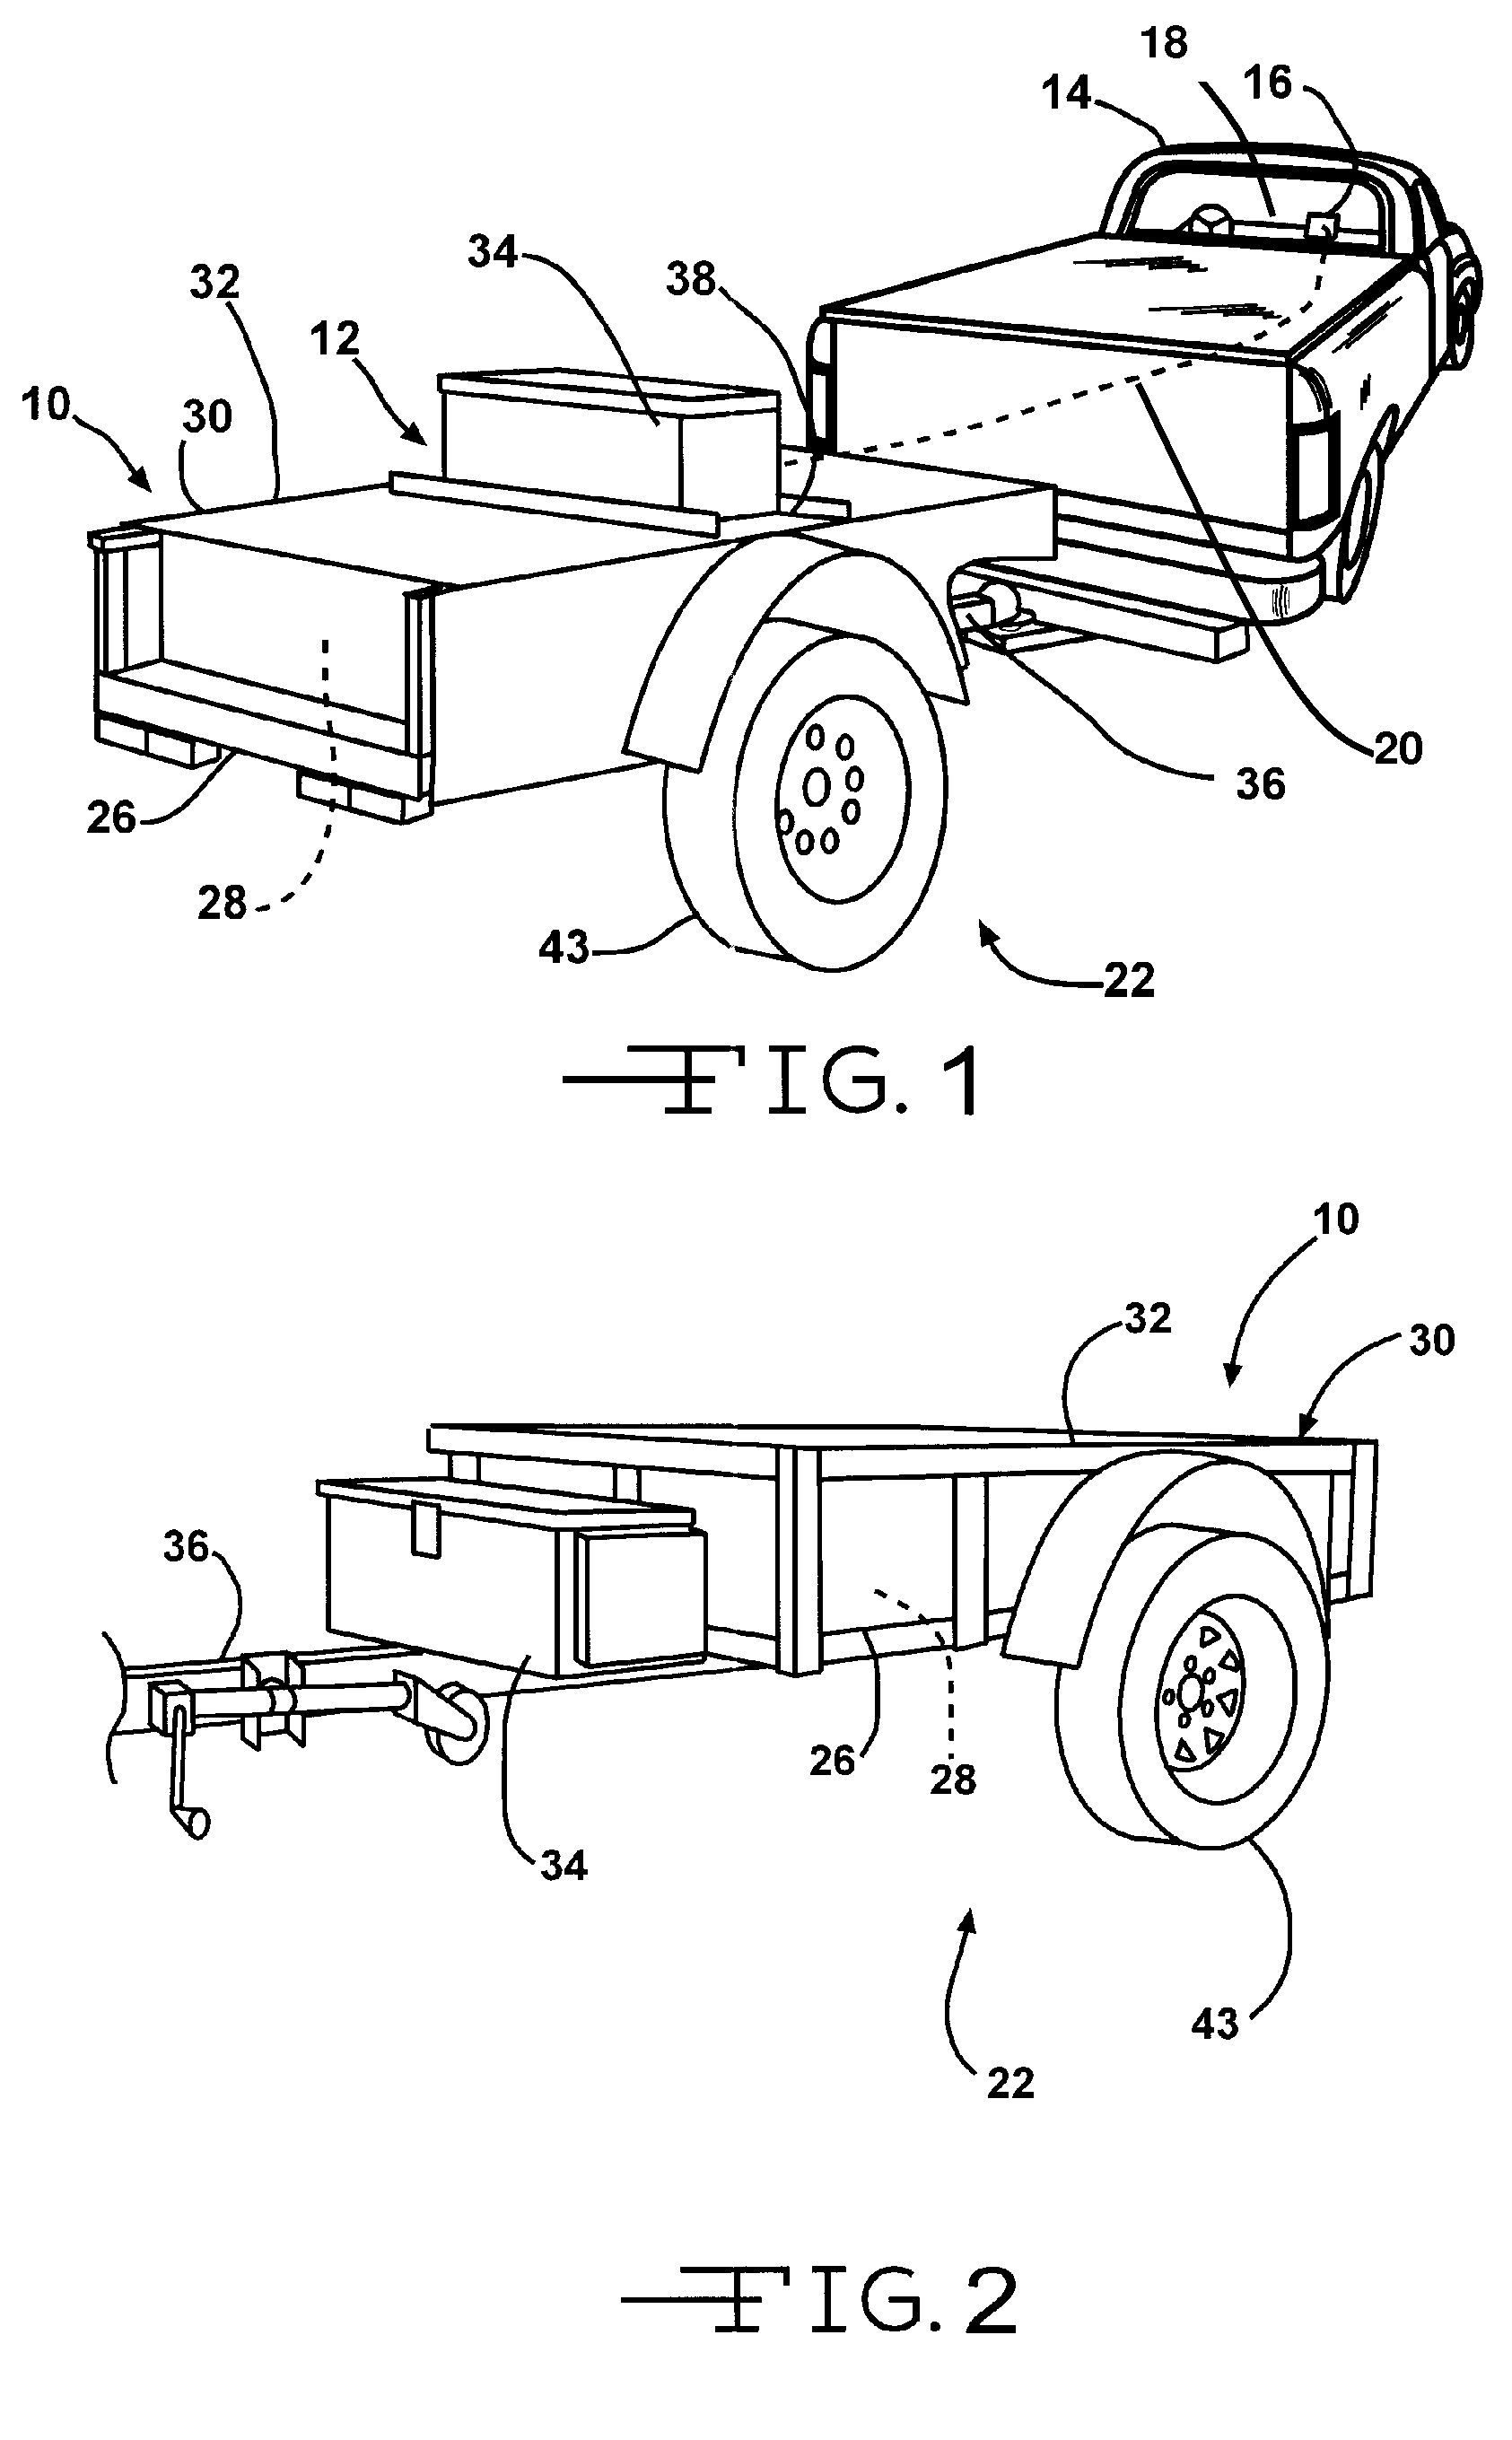 Trailer with integral axle-mounted generator and battery charger